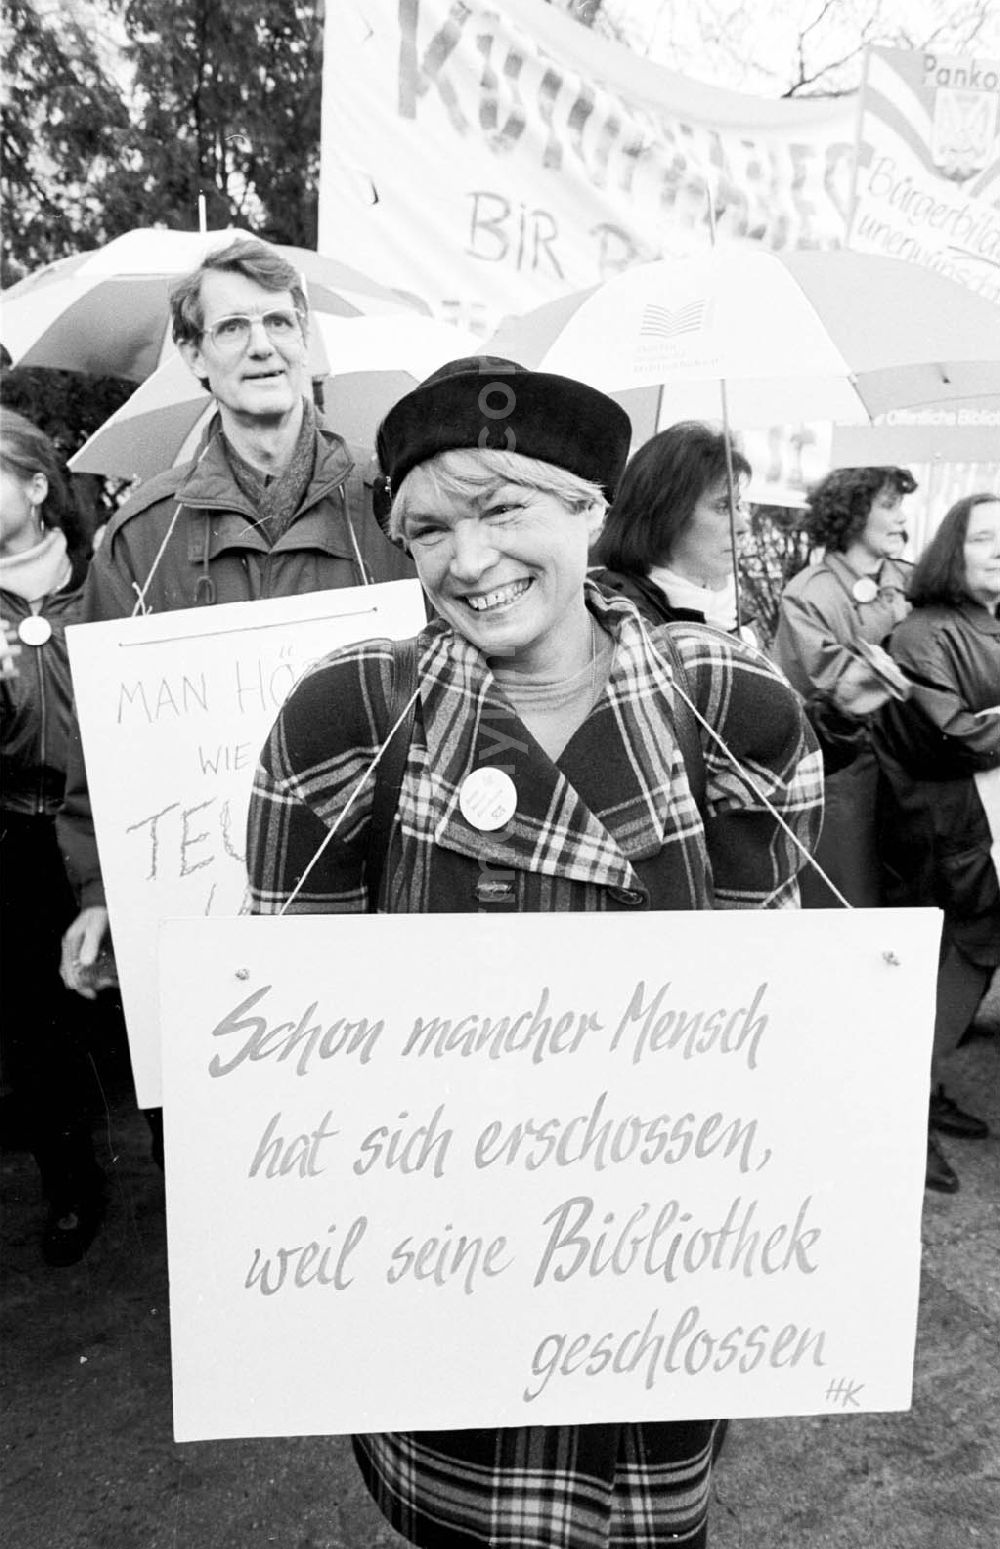 GDR picture archive: Berlin - Umschlagsnr.: 1993-26